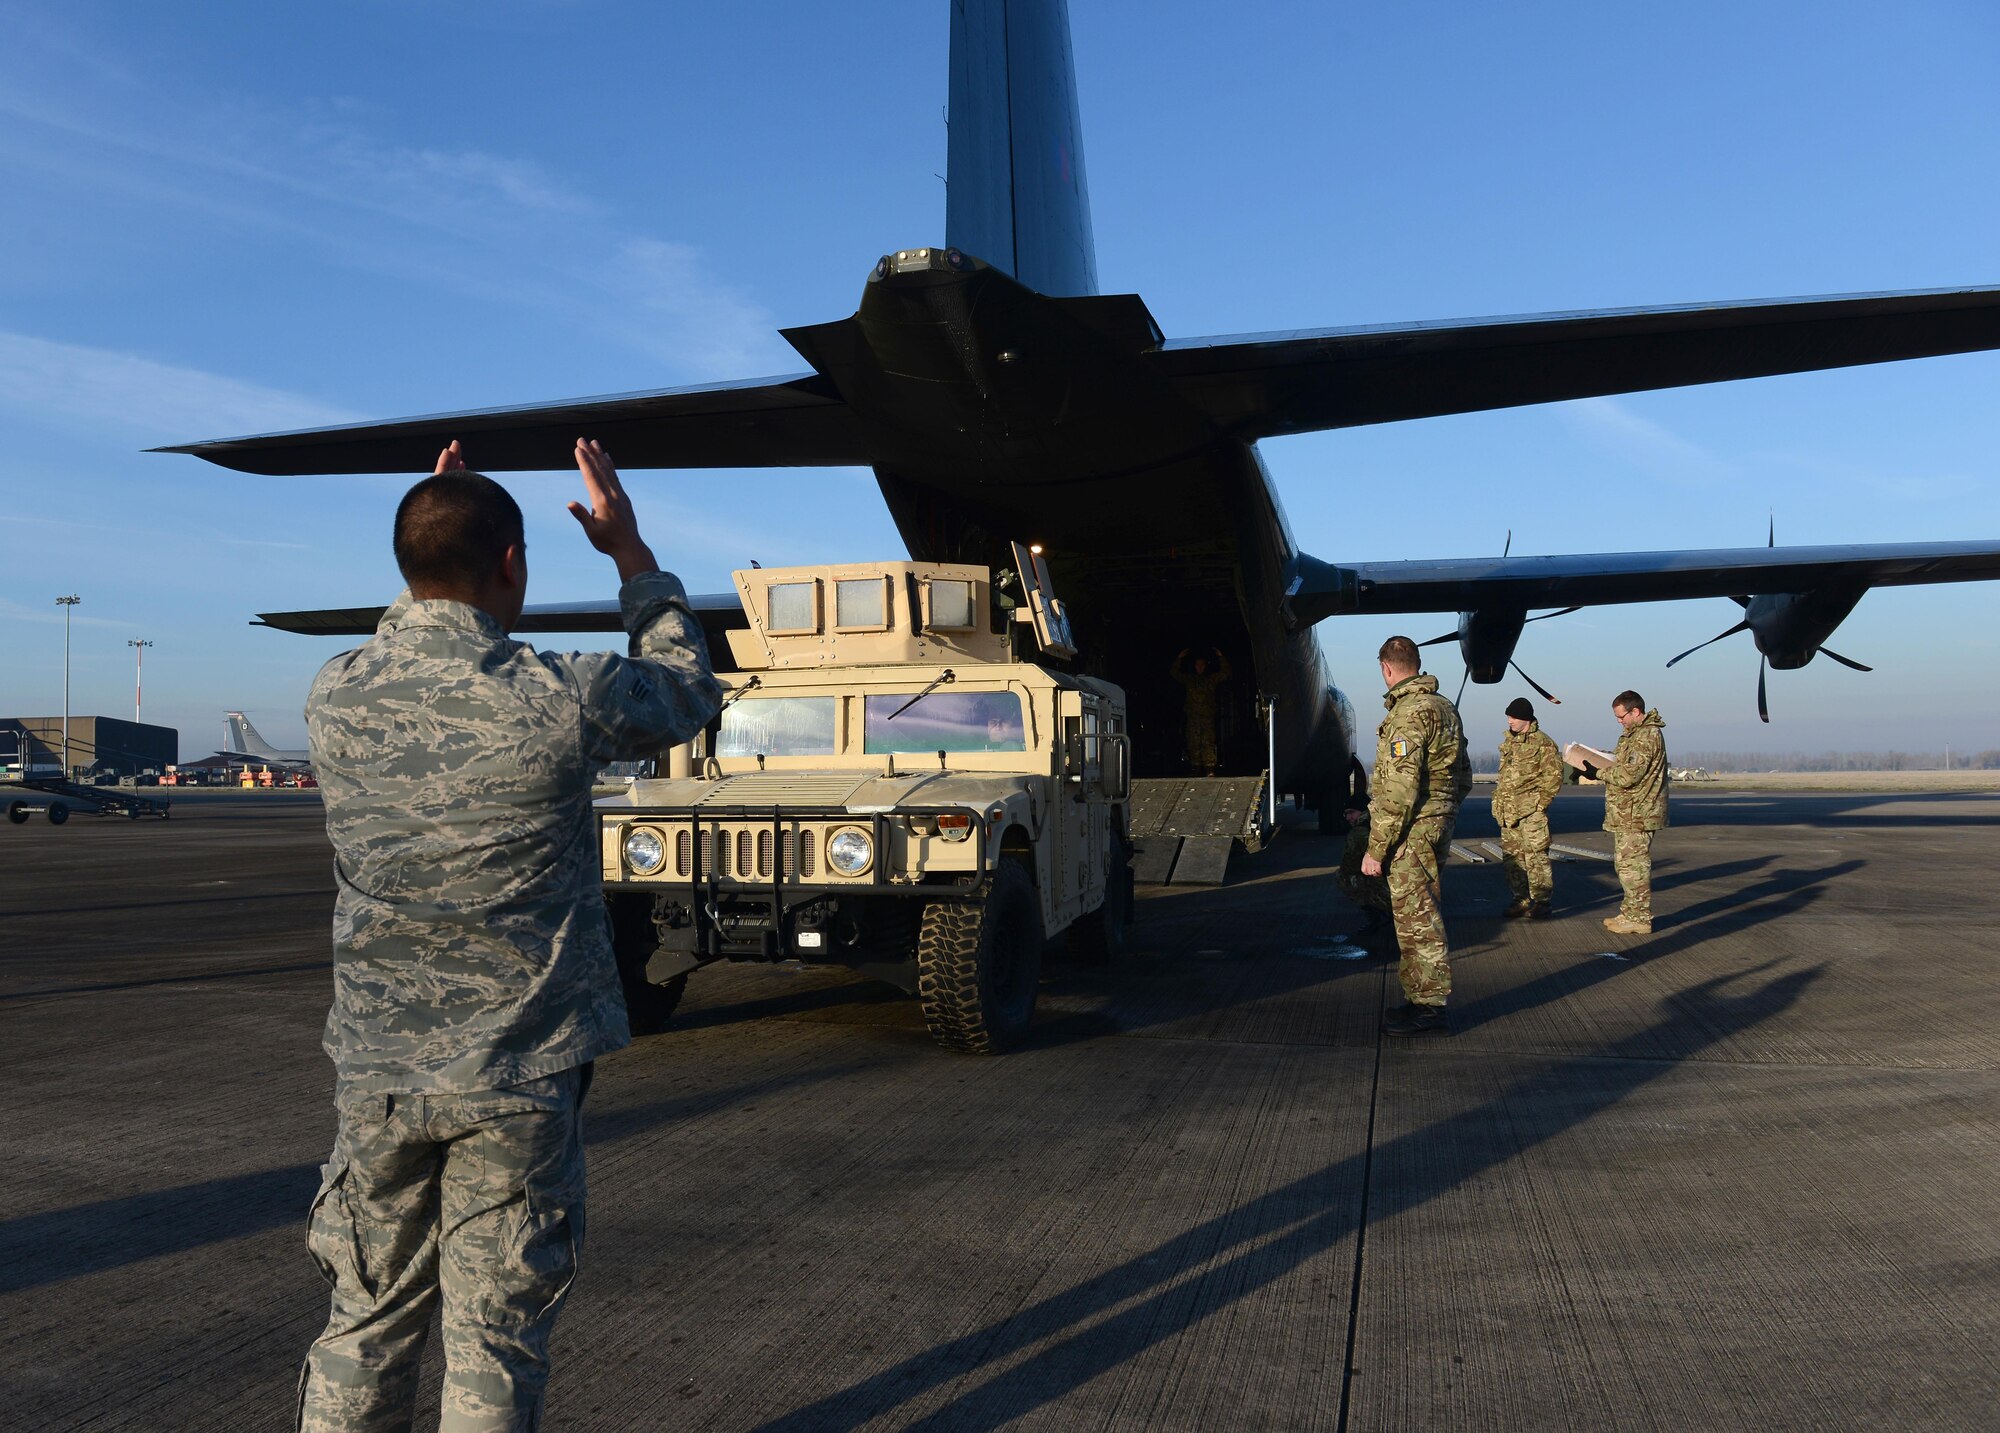 Members of the 352nd Special Operations Support Squadron deployed aircraft ground response element, work with members of the Royal Air Force to marshal a Humvee into a RAF C-130J Super Hercules during training Jan. 20, 2015, on RAF Mildenhall, England. Members of the 352nd SOSS DAGRE team worked with members of the RAF to practice loading and unloading the Humvee in preparation for their upcoming joint training exercise, Emerald Warrior, held at Hurlburt Field, Fla. (U.S. Air Force photo by Senior Airman Kate Maurer/Released)